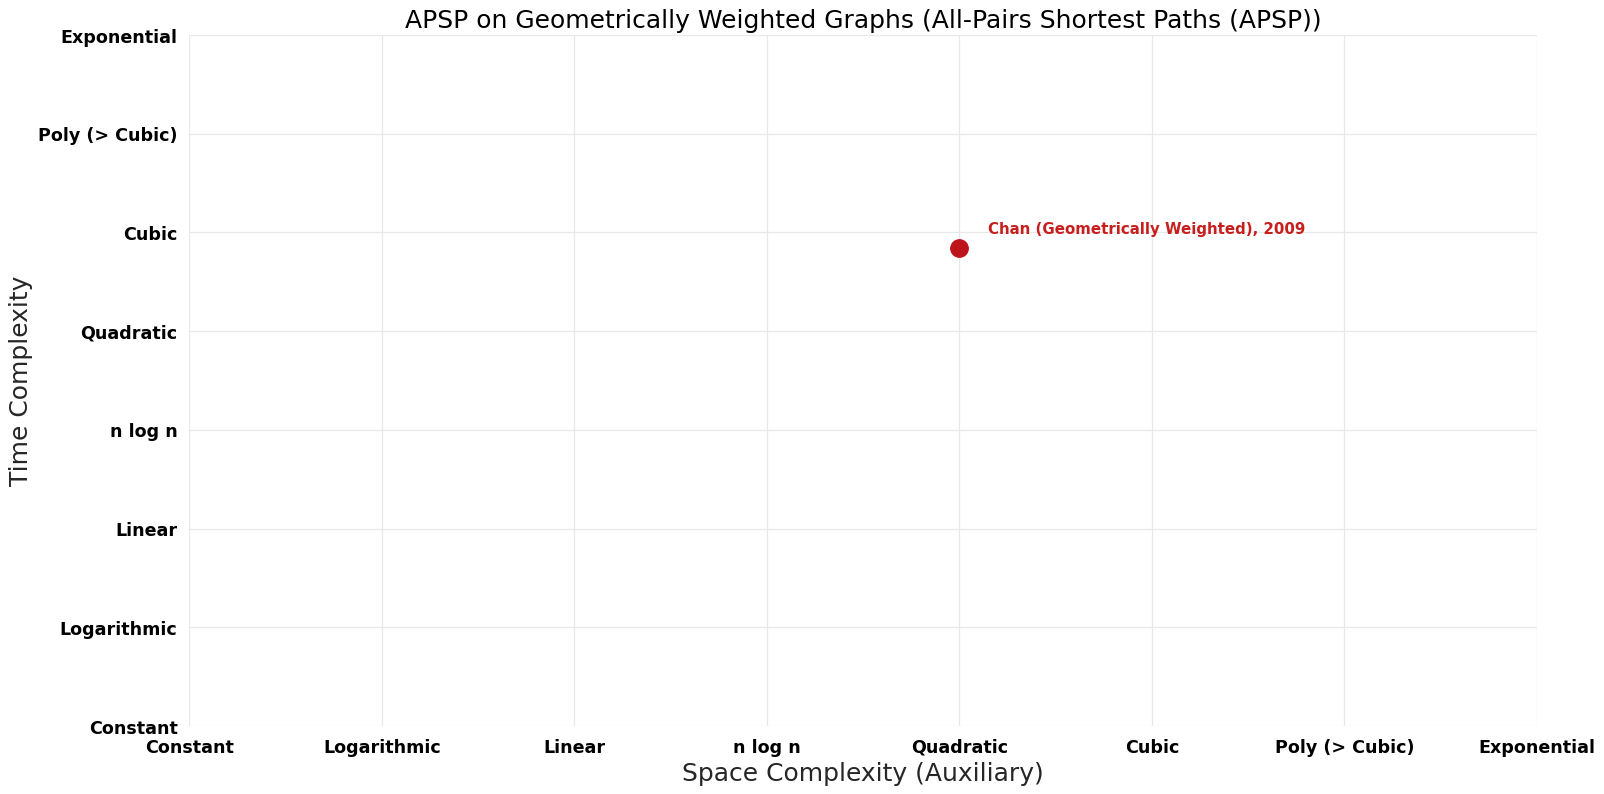 All-Pairs Shortest Paths (APSP) - APSP on Geometrically Weighted Graphs - Pareto Frontier.png